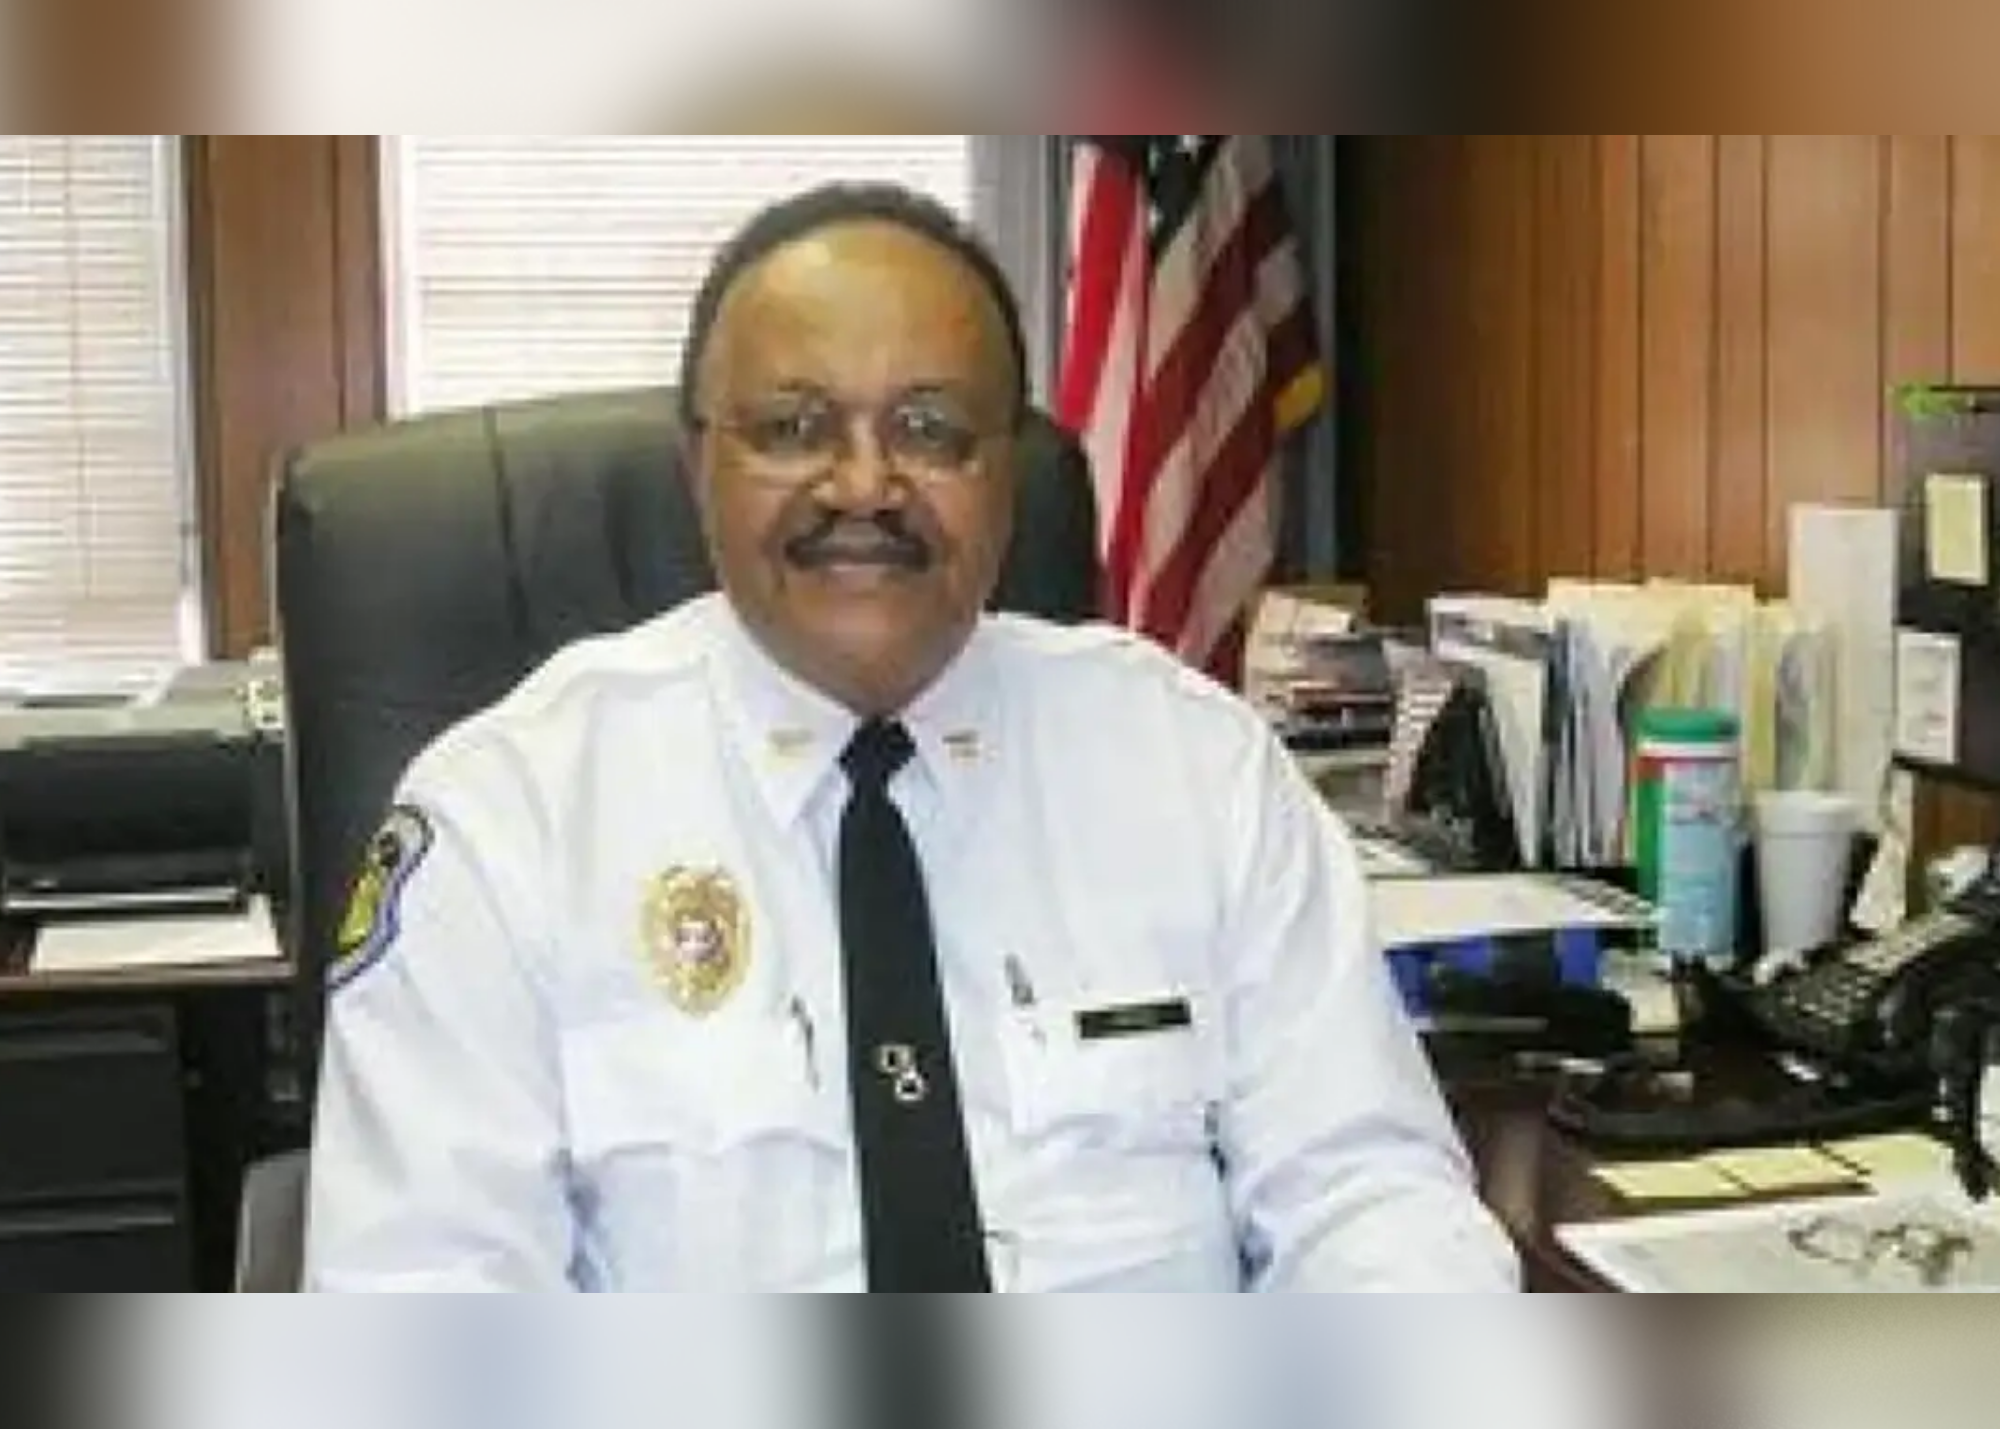 Retired Police Captain Fatally Shot After Responding To Pawn Shop Alarm During Looting